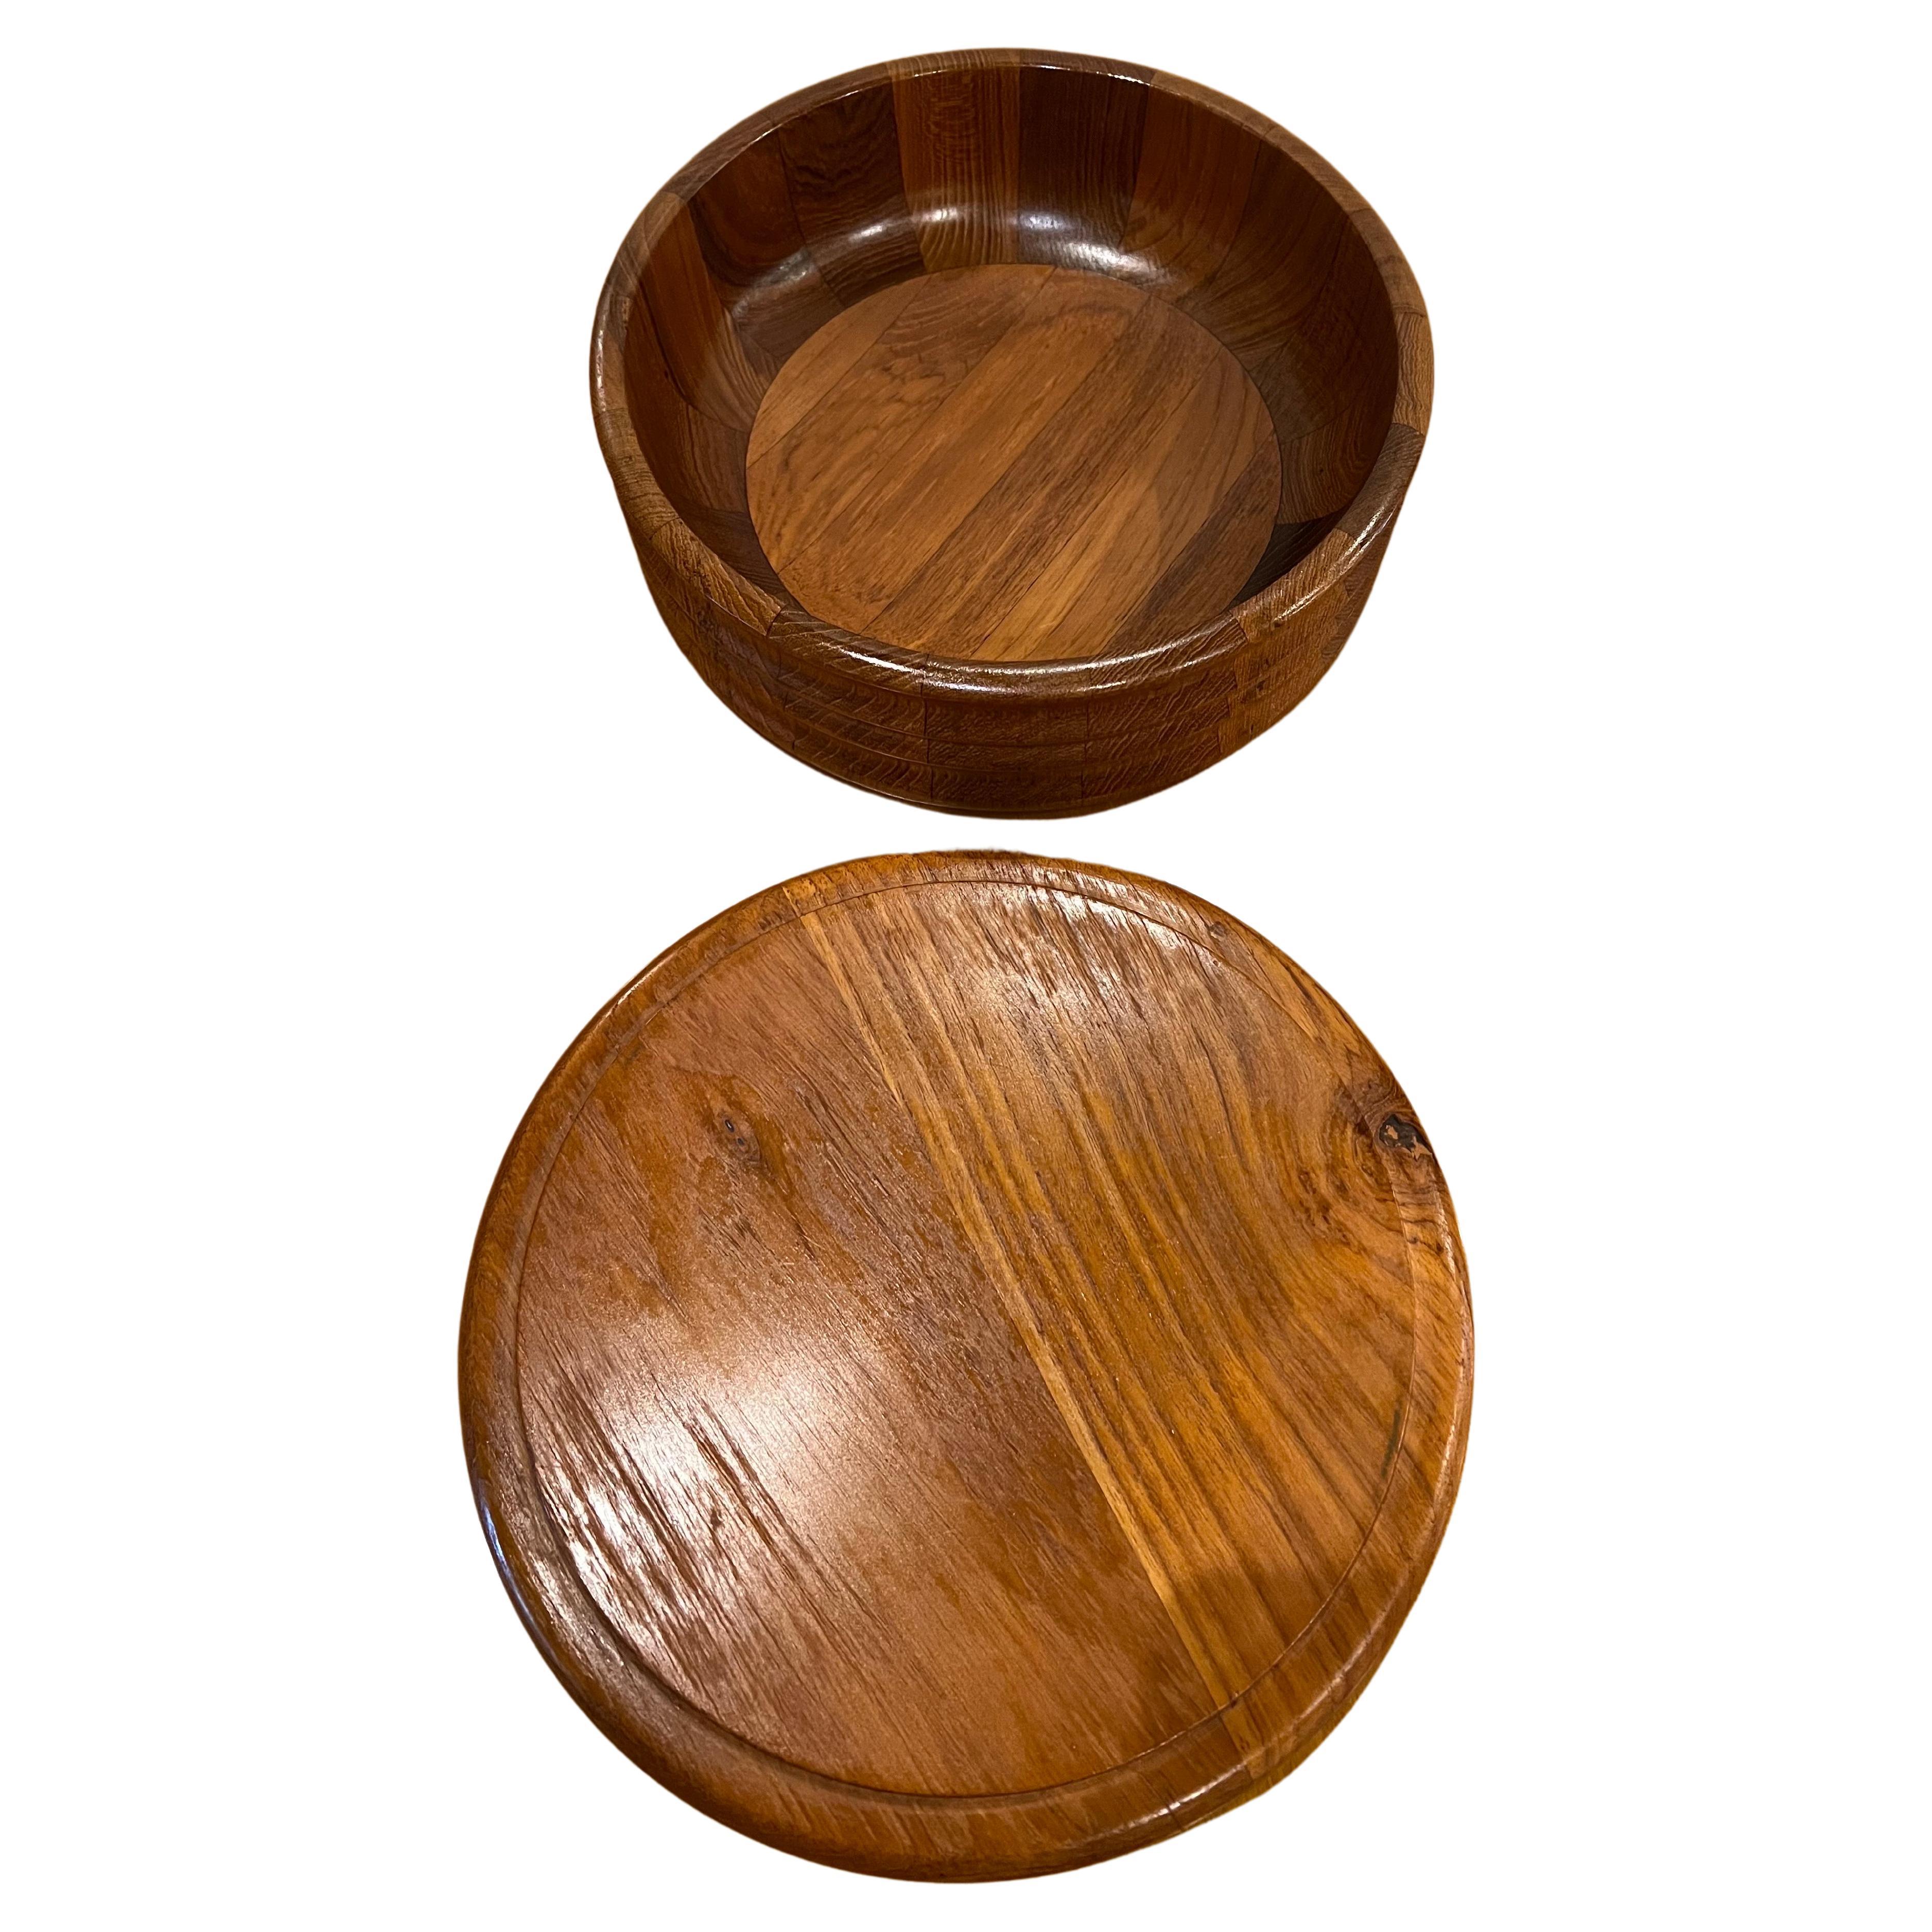 Beautiful solid teak salad Bowl with lid for multiple uses, salad or tortilla to keep it warm with lid, incredible craftsmanship.